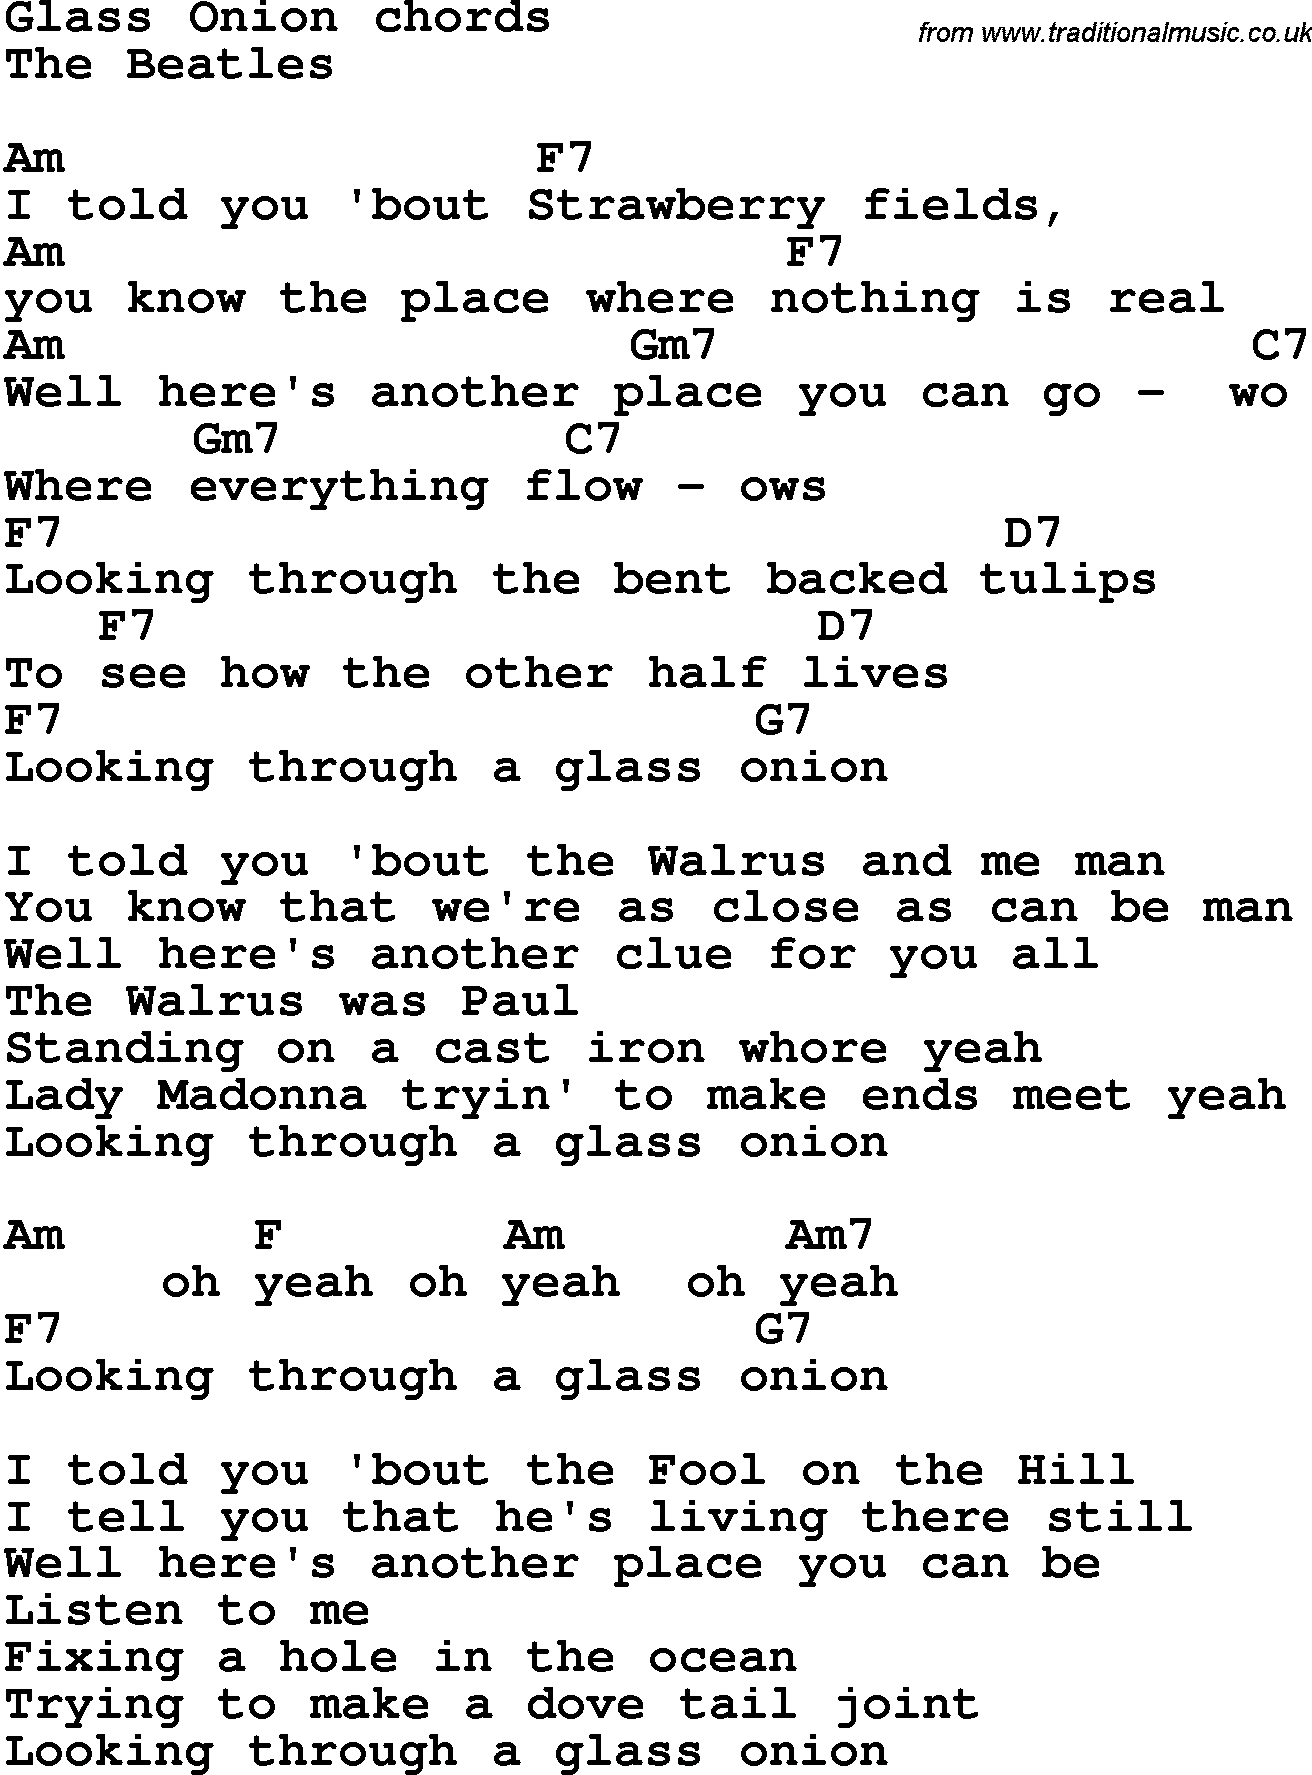 Song lyrics with guitar for Glass Onion The Beatles